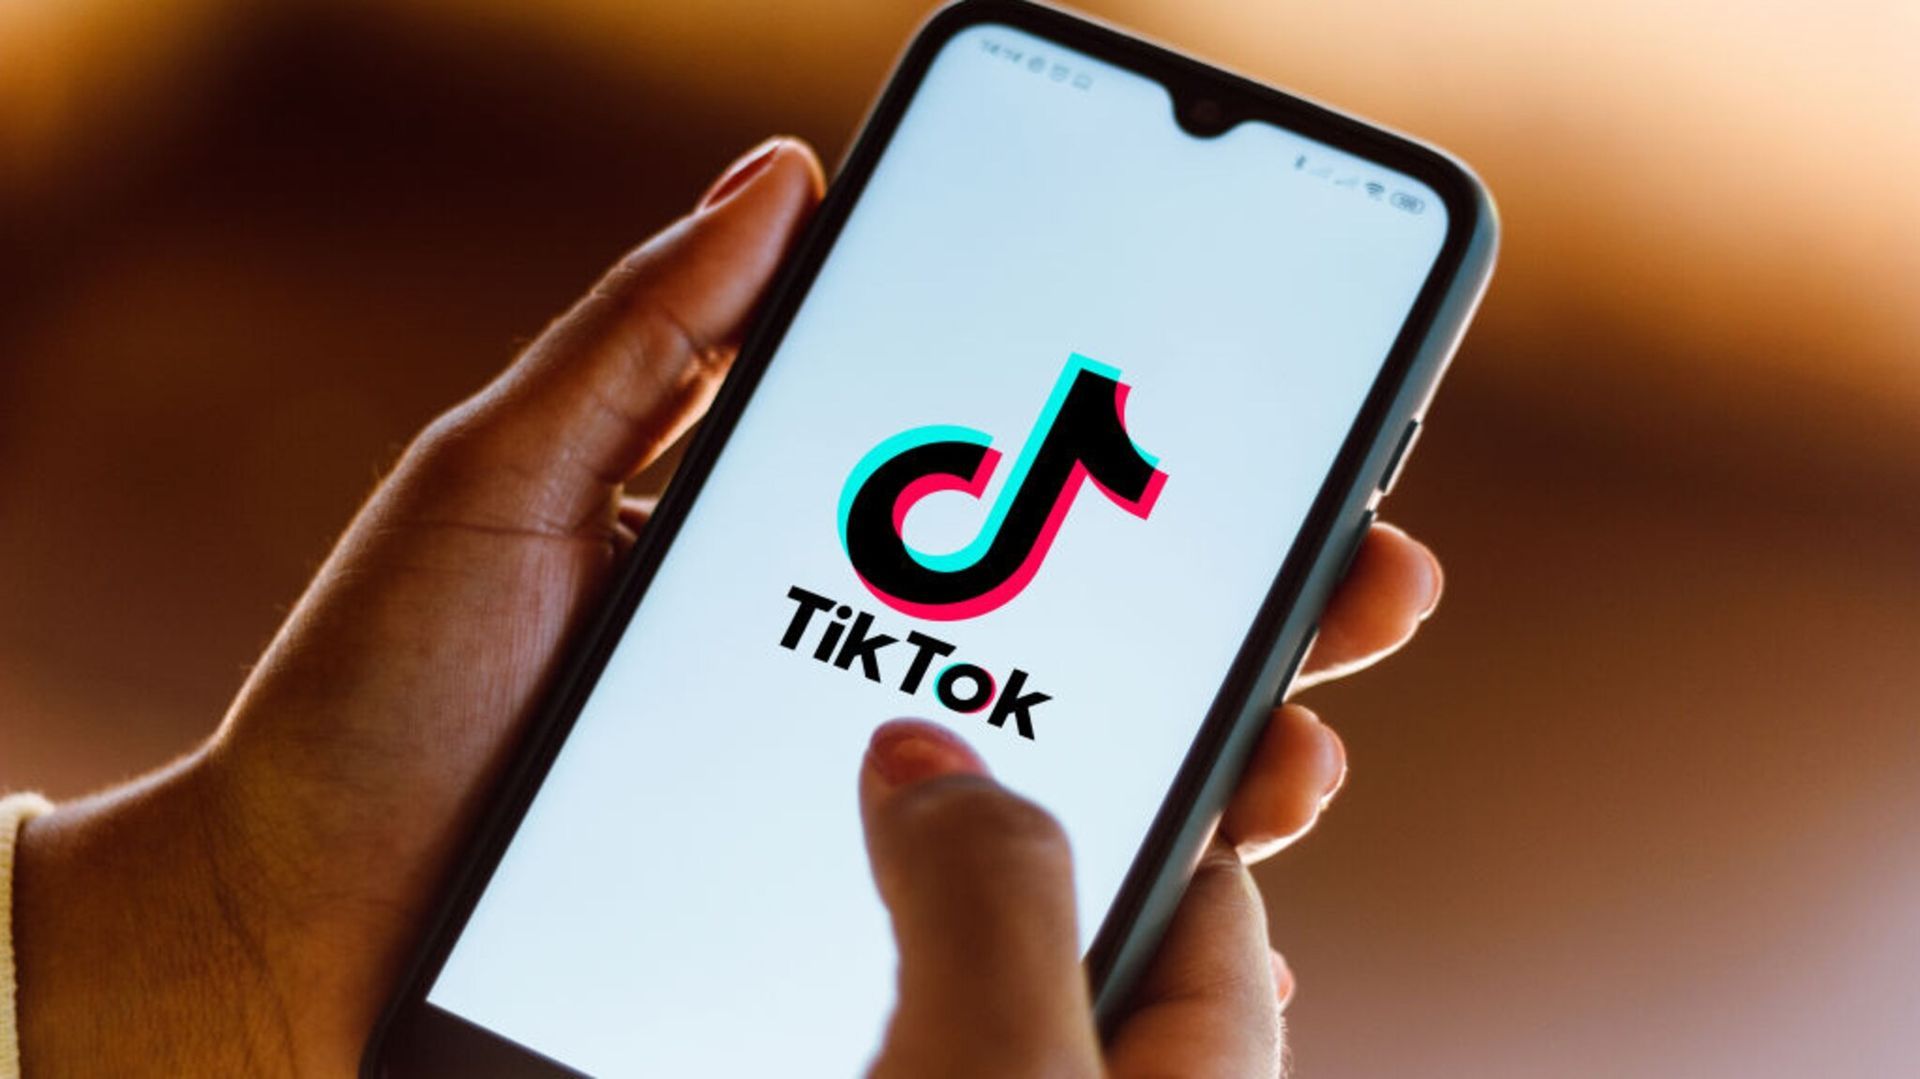 Serbian dancing lady on TikTok: Who is her?